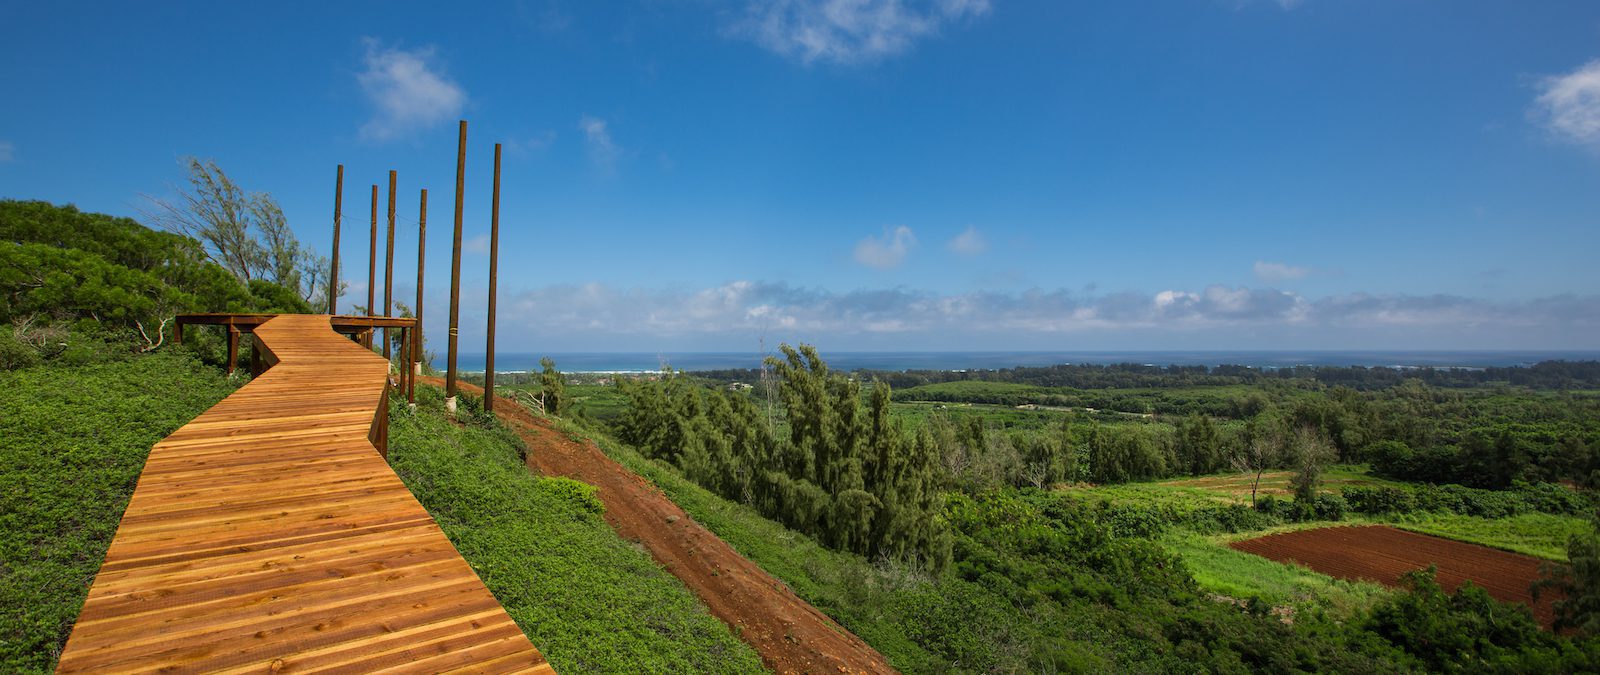 5 Reasons to Try Our Oahu Zipline Tour for the First Time